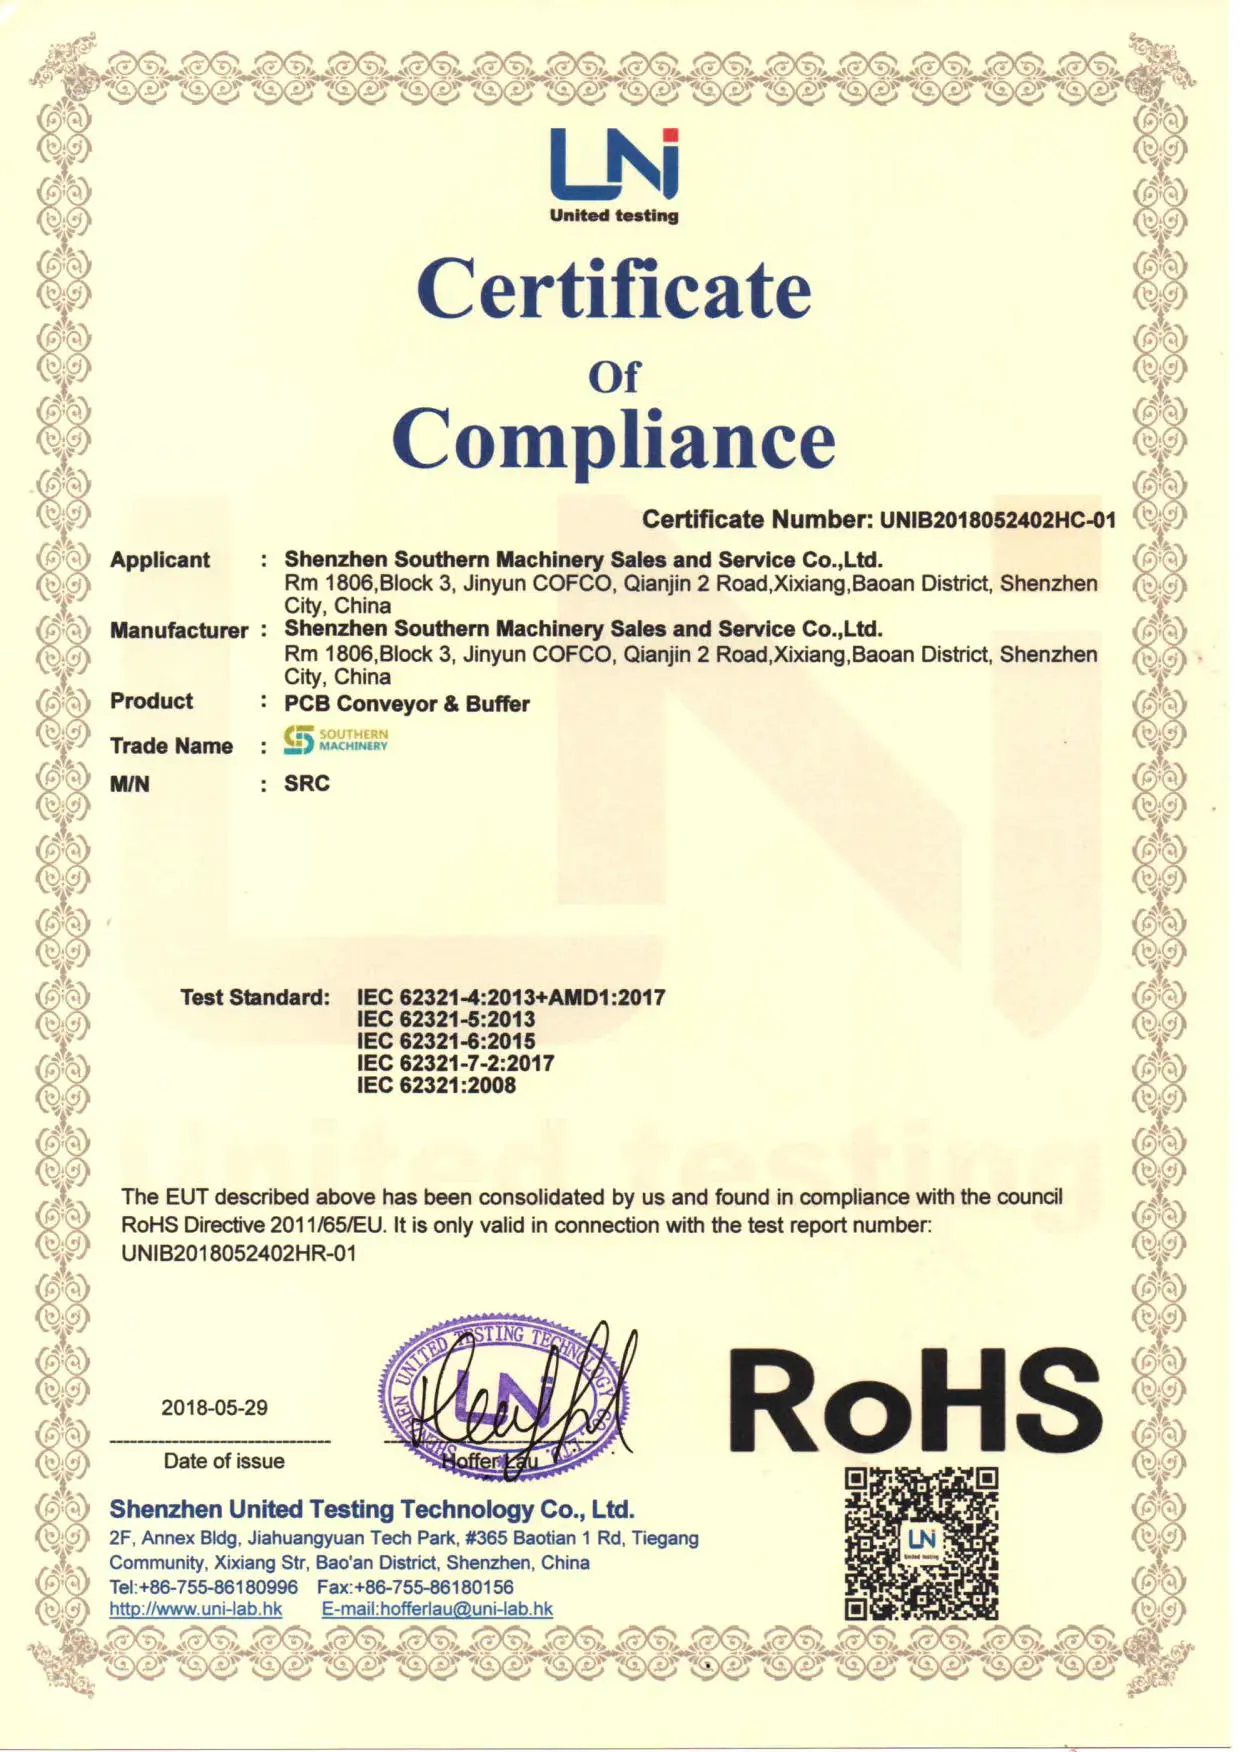 PCB ConveyorBuffer ROHS Certification